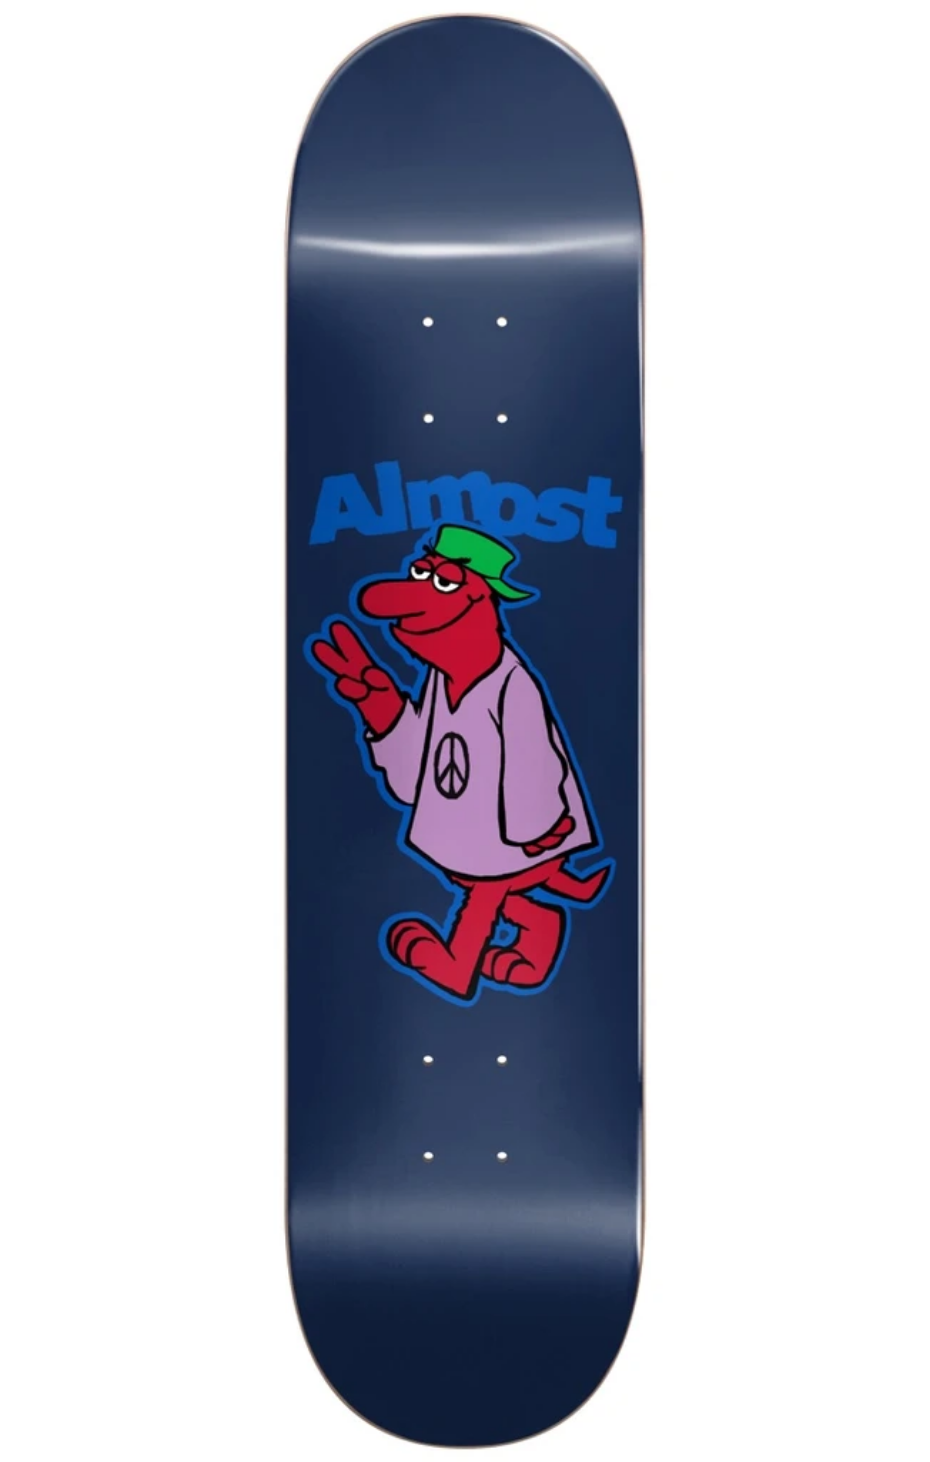 Almost Peace out 8.375" skateboard deck